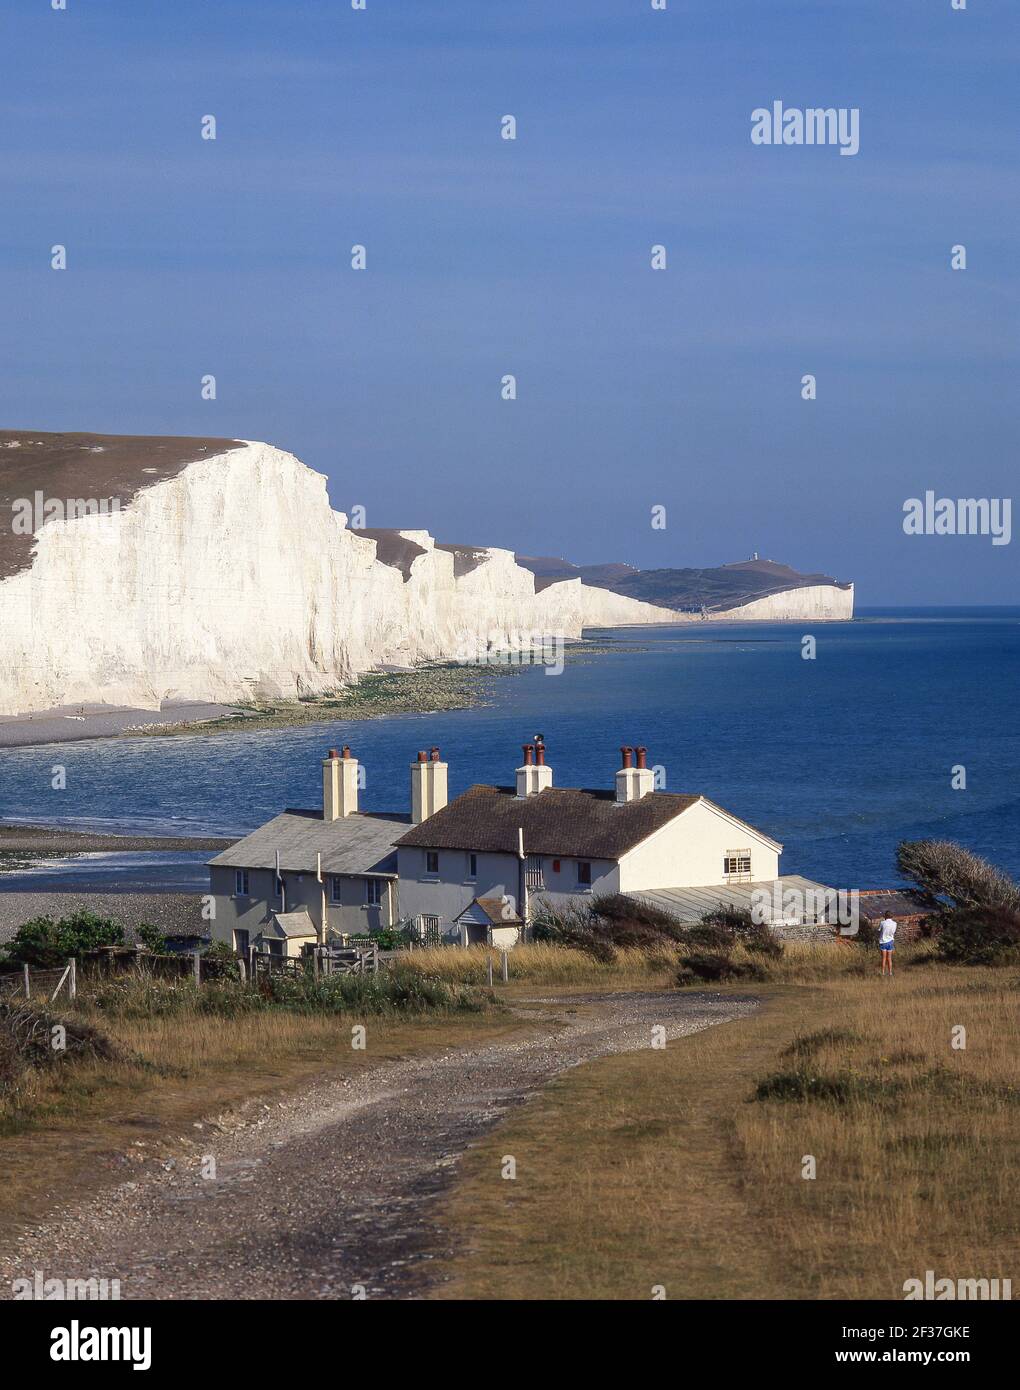 Seven Sisters Cliffs and Coastguard Cottages, Cuckmere Haven, Seaford Head Nature Reserve, Seaford, East Sussex, England, United Kingdom Stock Photo